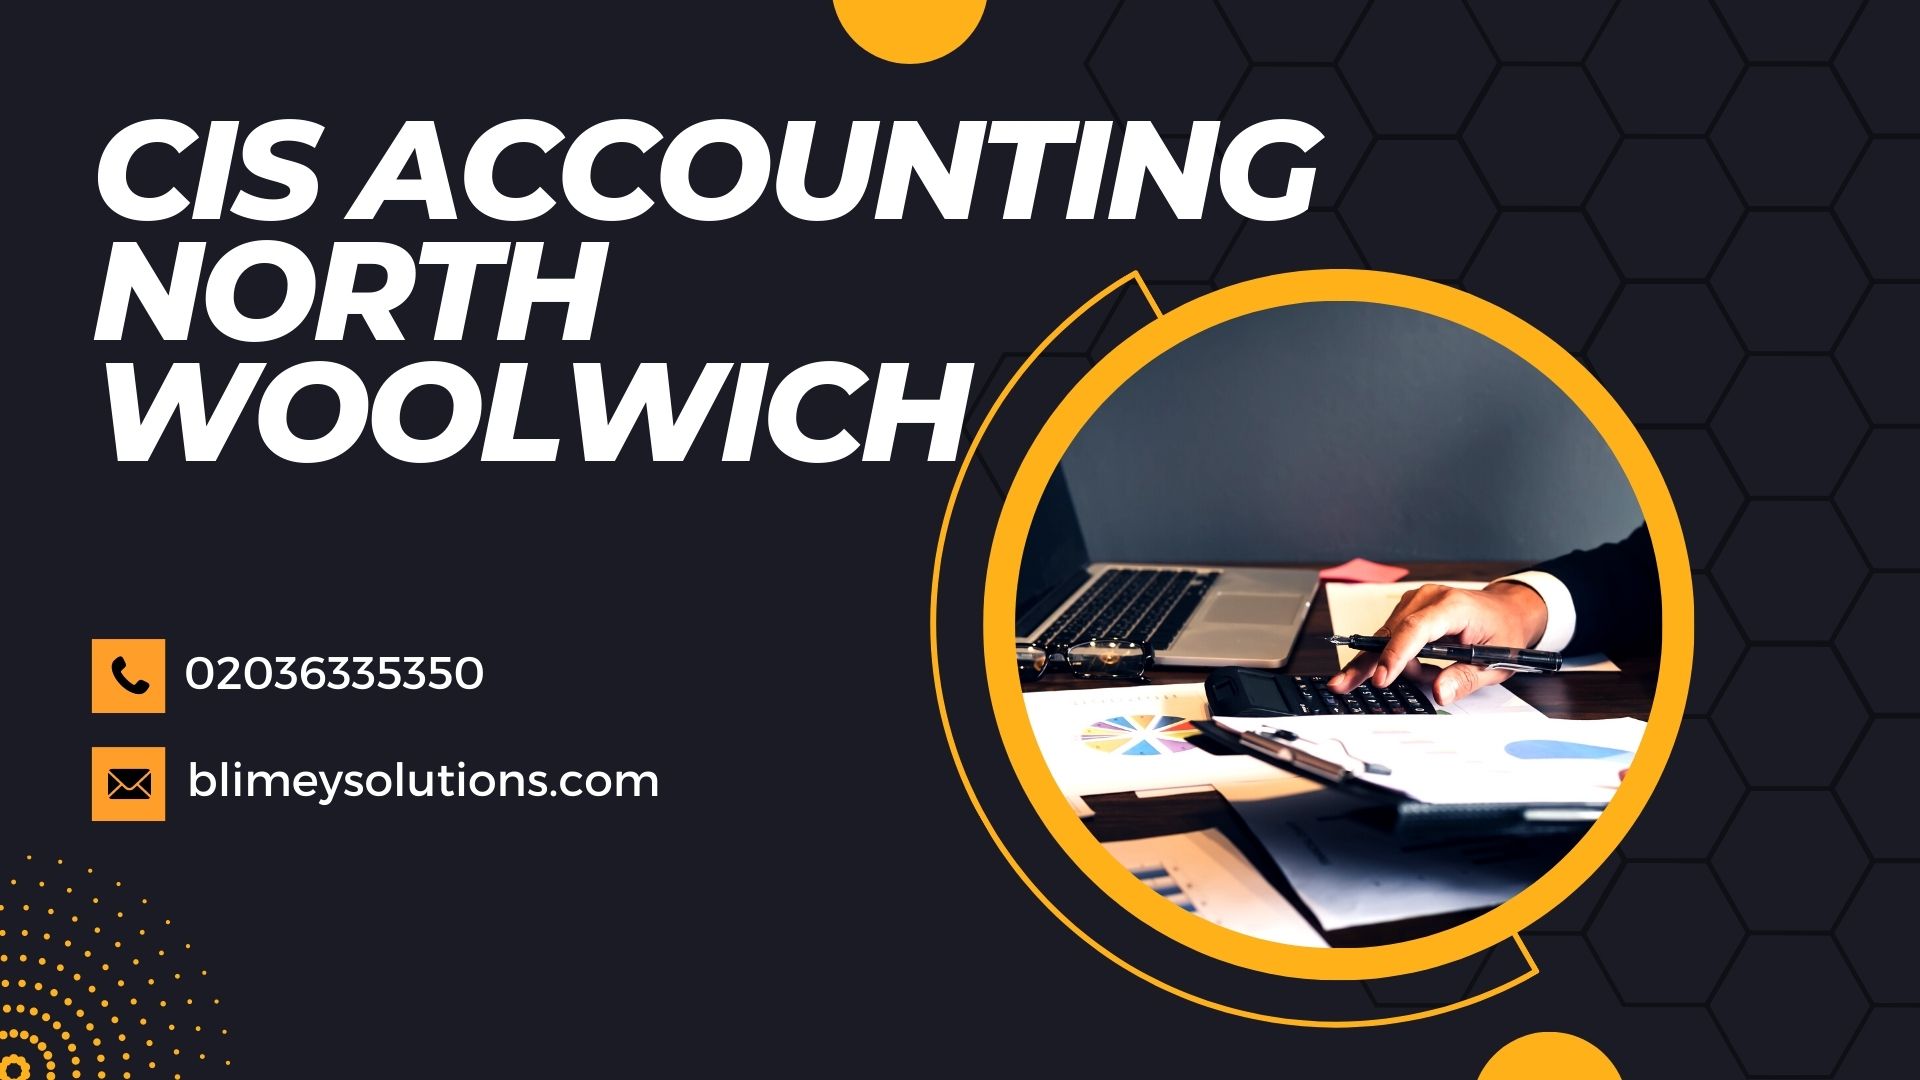 Cis Accounting In North Woolwich E16 London